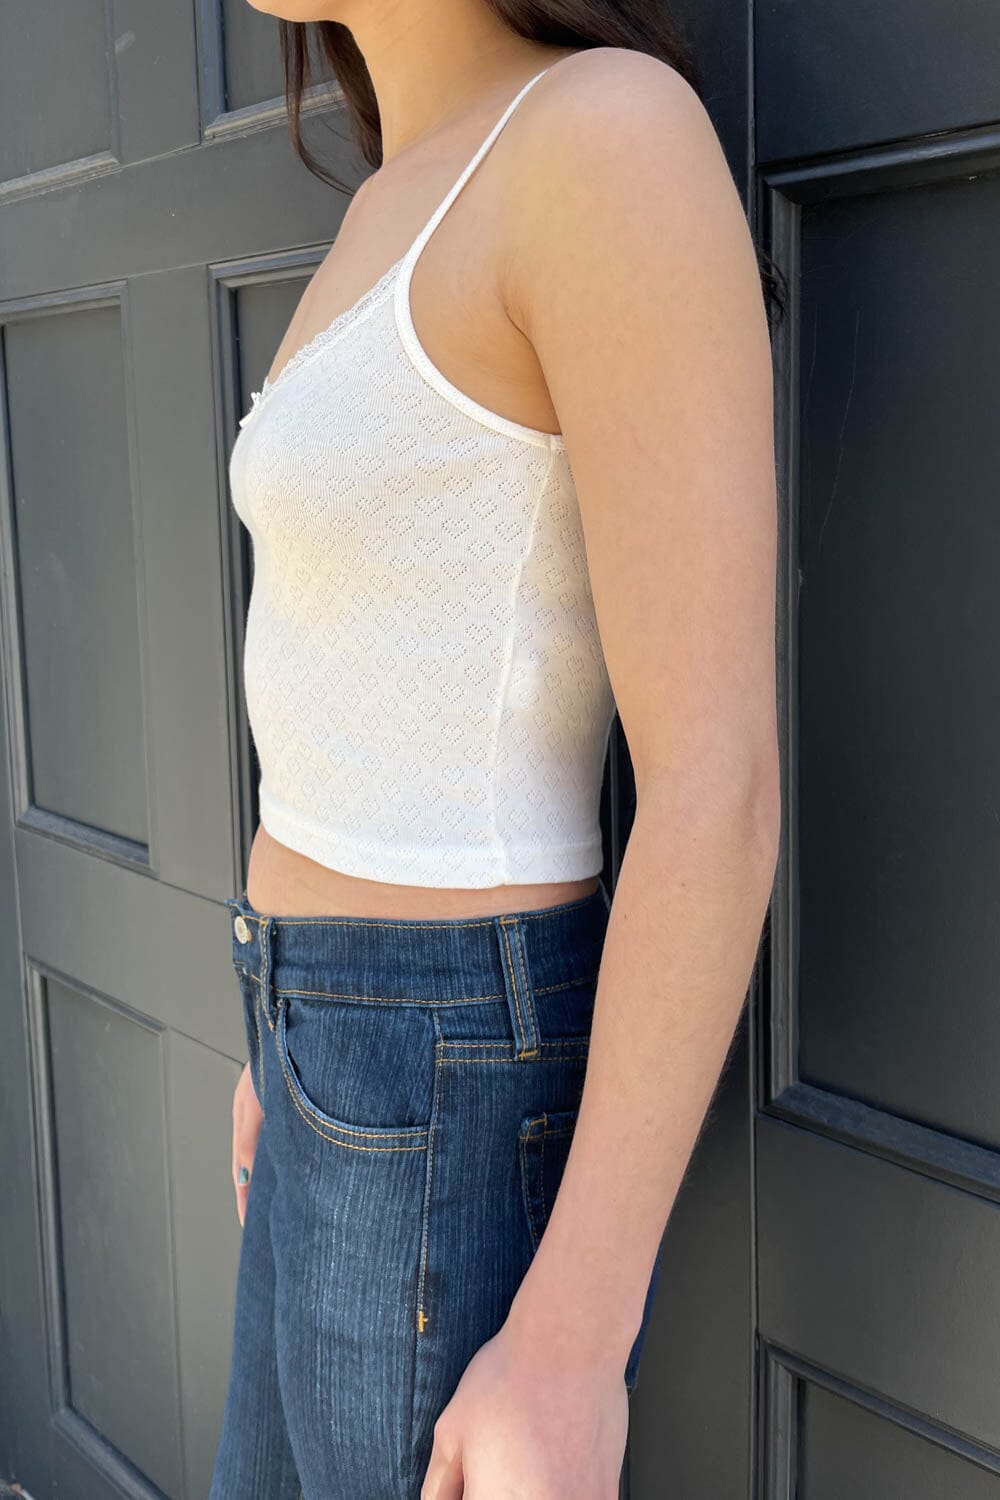 FR brandy melville skylar heart pointelle camisole white tank top coquette  lace